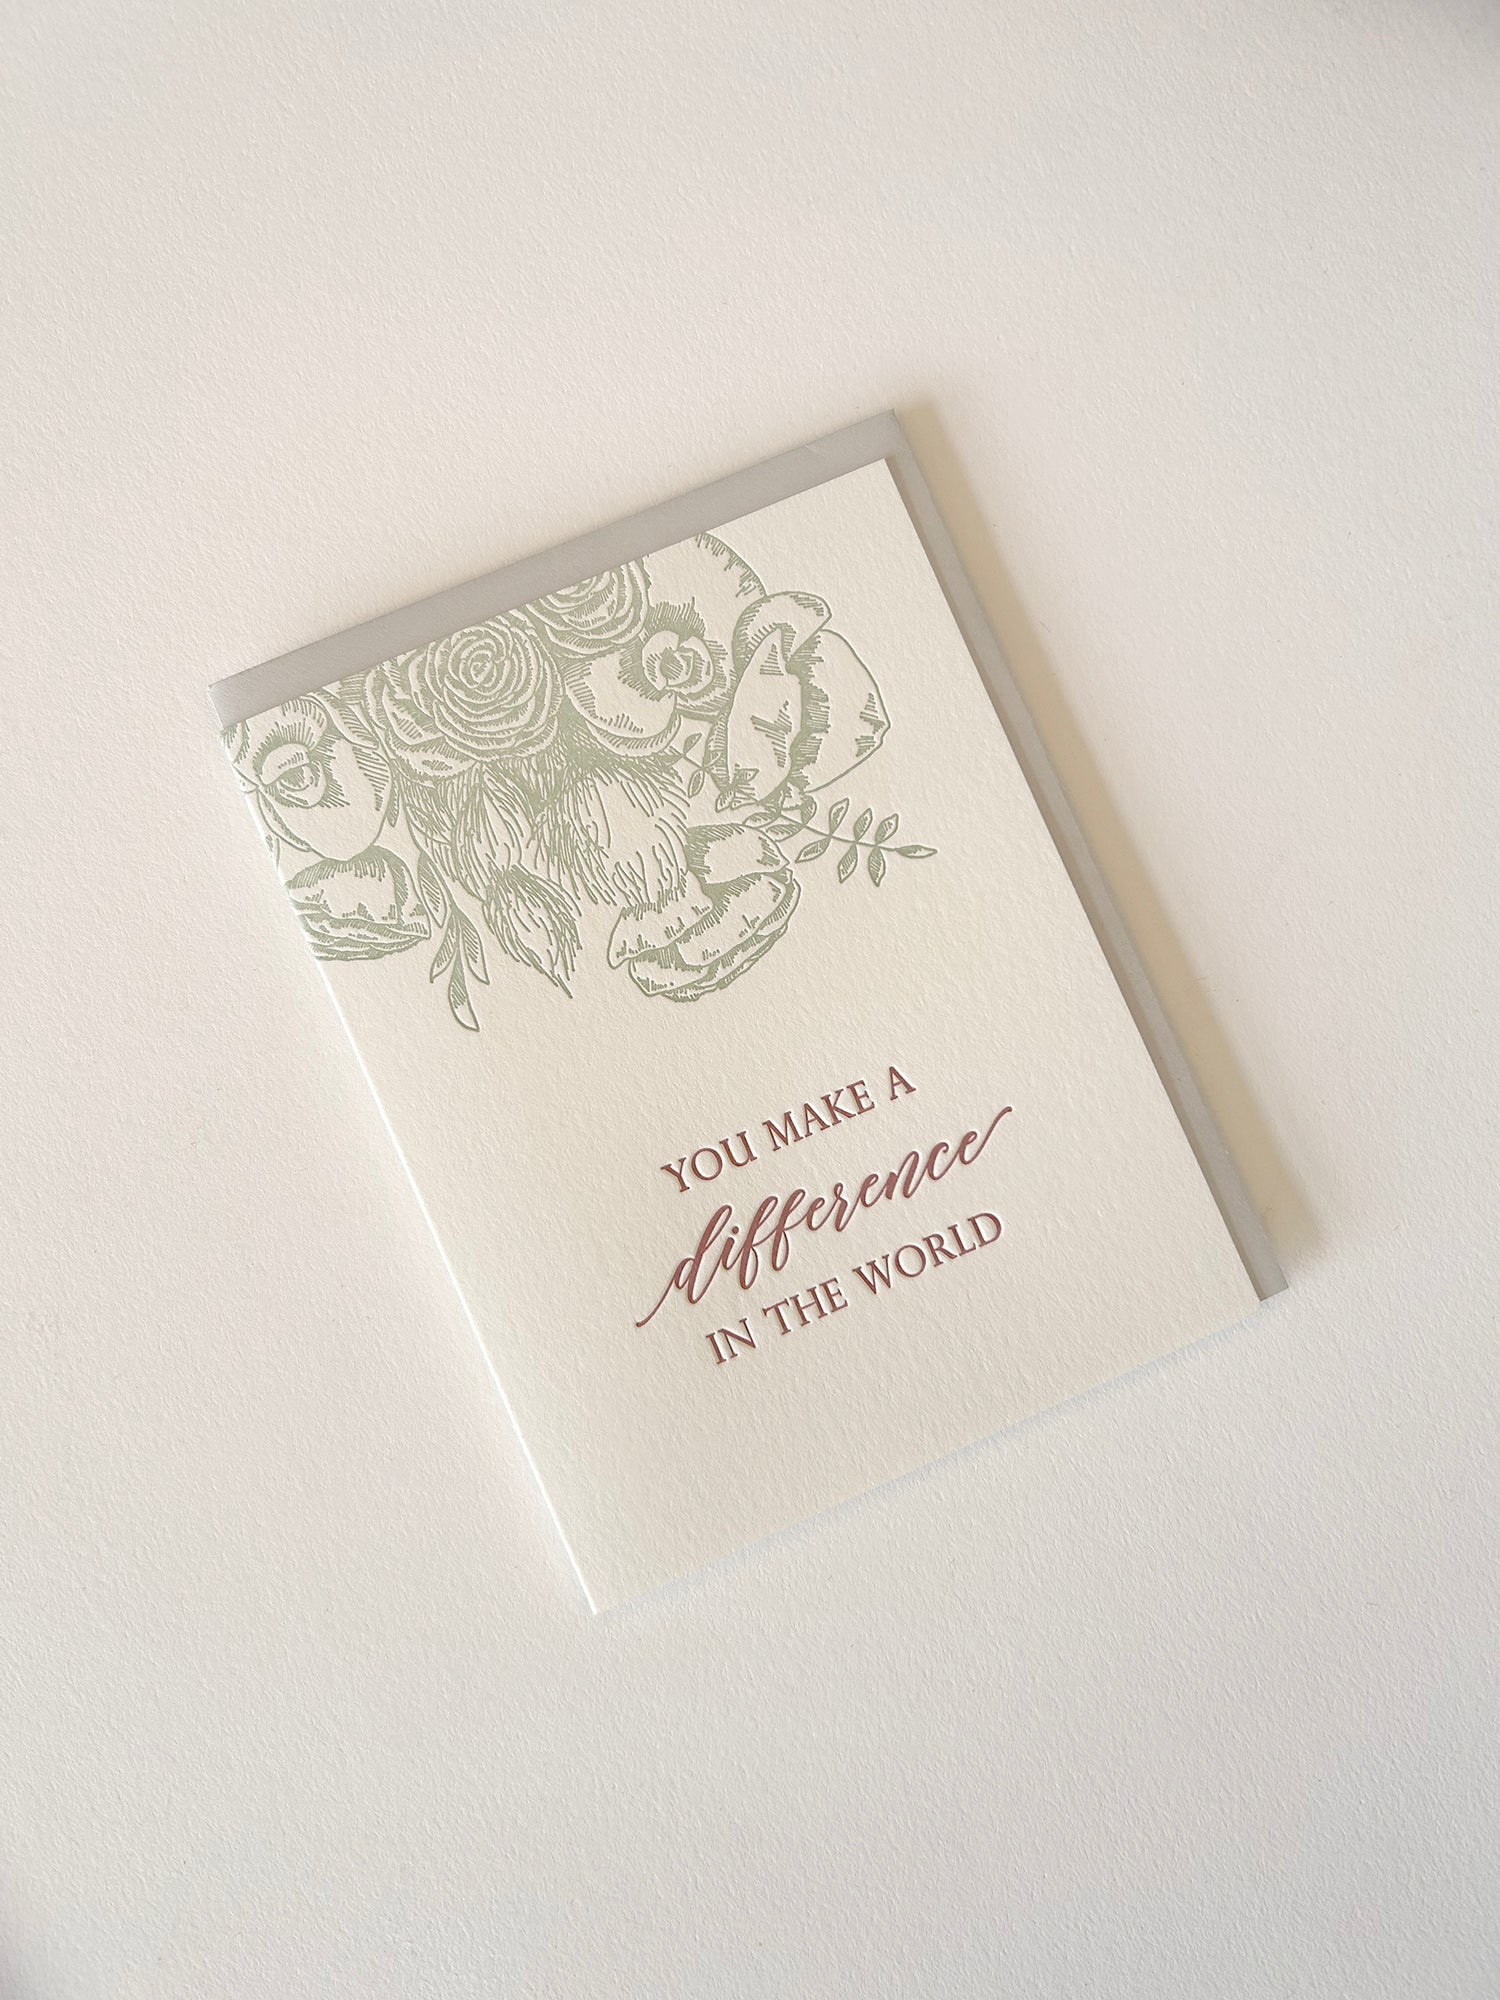 Letterpress encouragement card with florals that says " You make a difference in the world" by Rust Belt Love